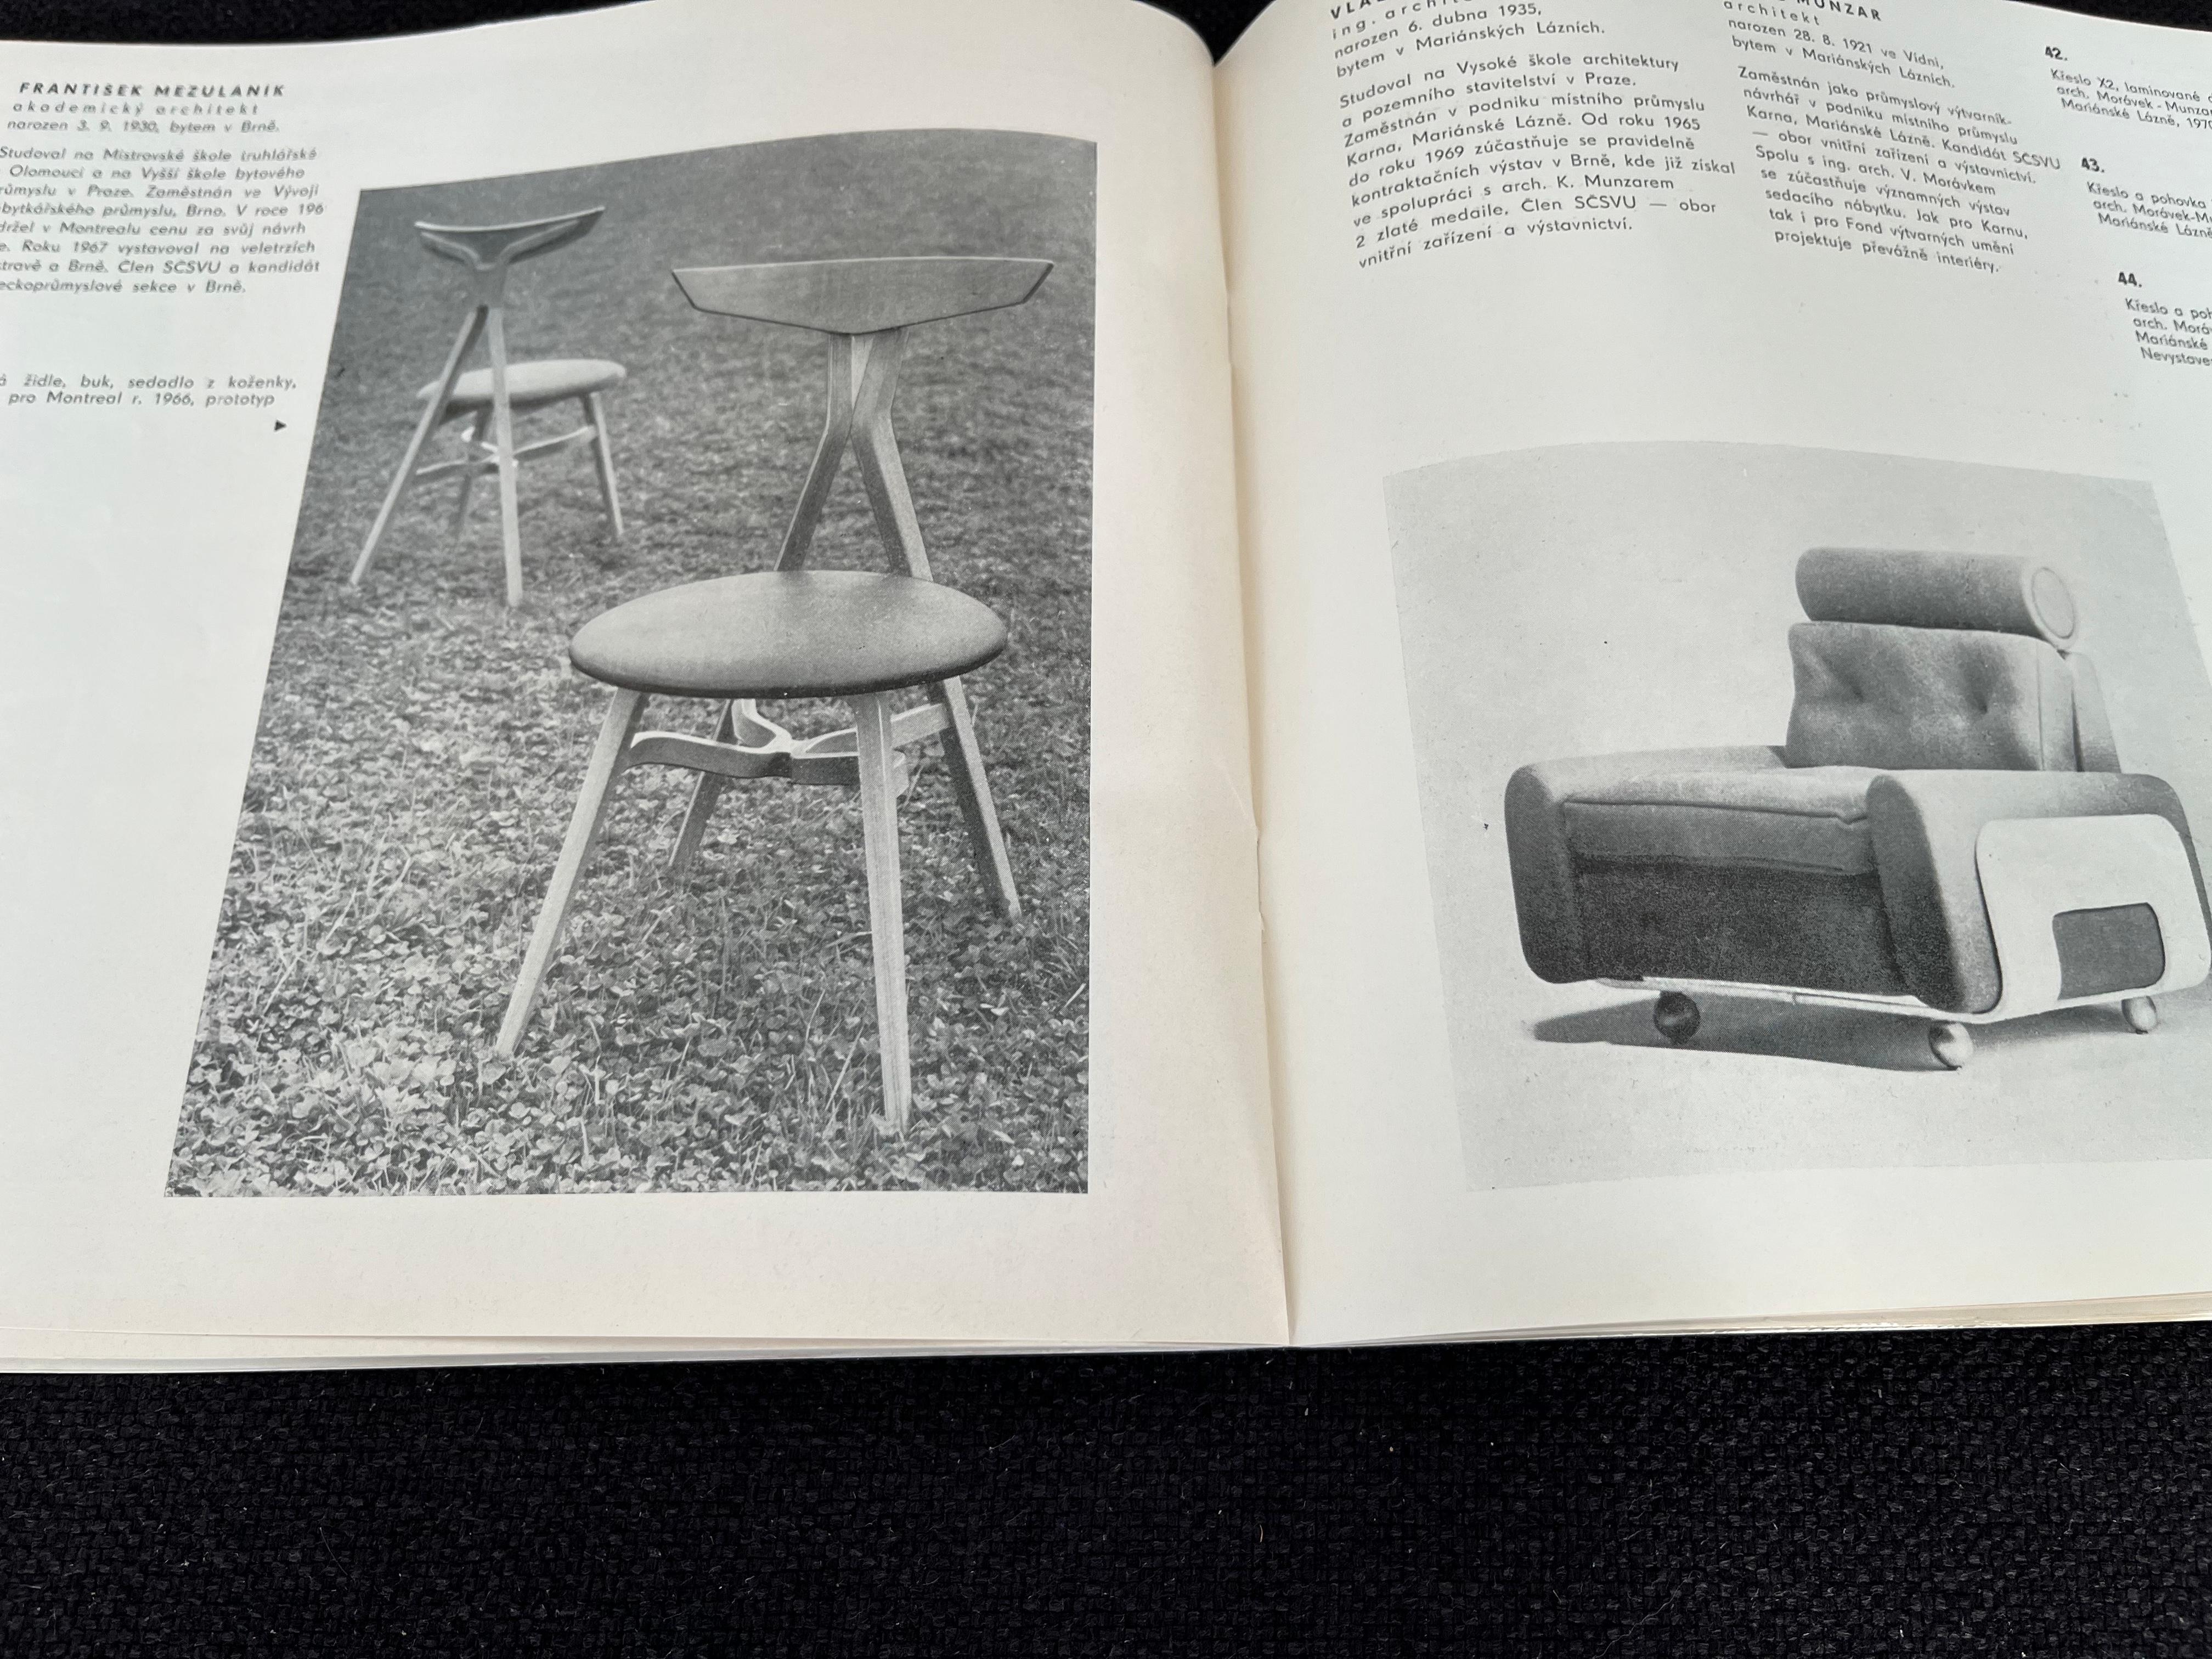 - 1970, Grafia, Brno
- czech language
- original condition, see the photos
- 47 pages
- many pictures of seating furniture by Czech designers
- jr.